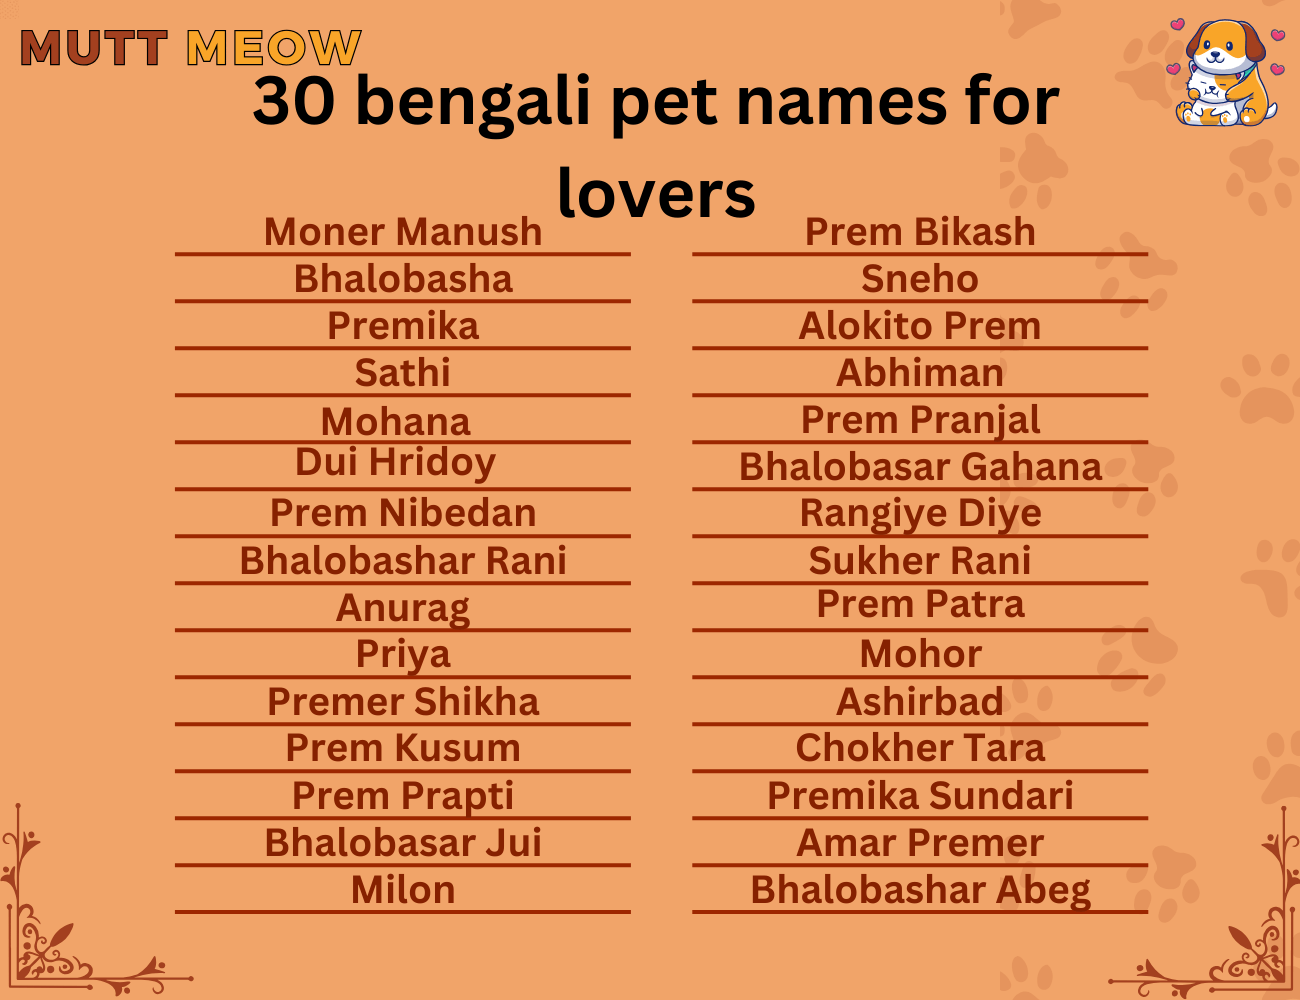 30 bengali pet names for lovers